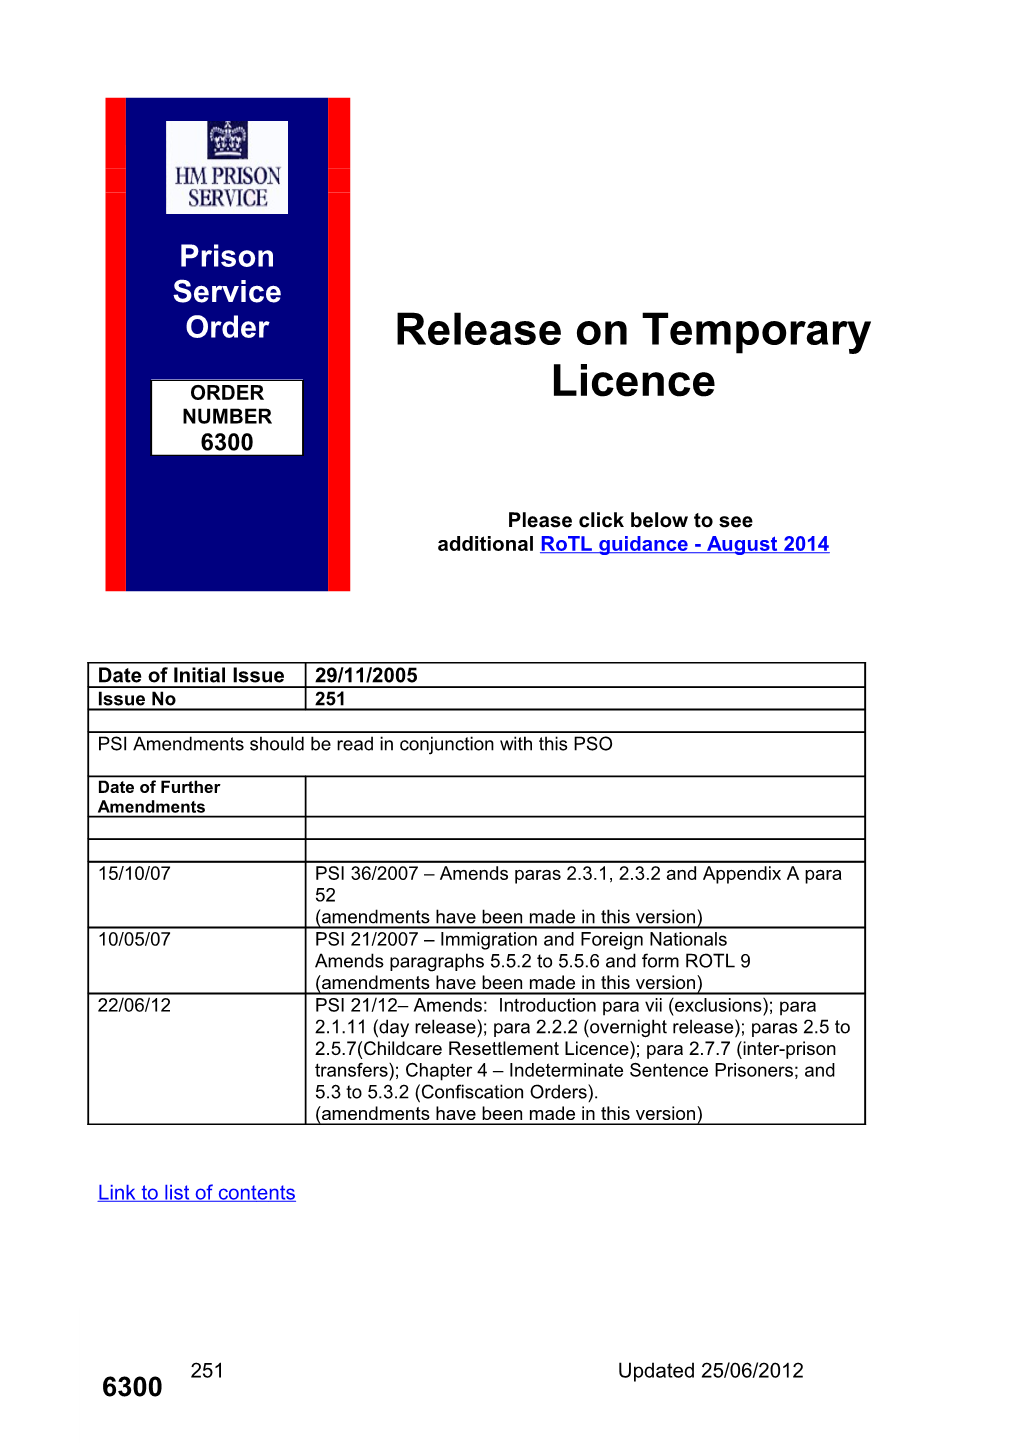 The Administrative Process for Release on Temporary Licence